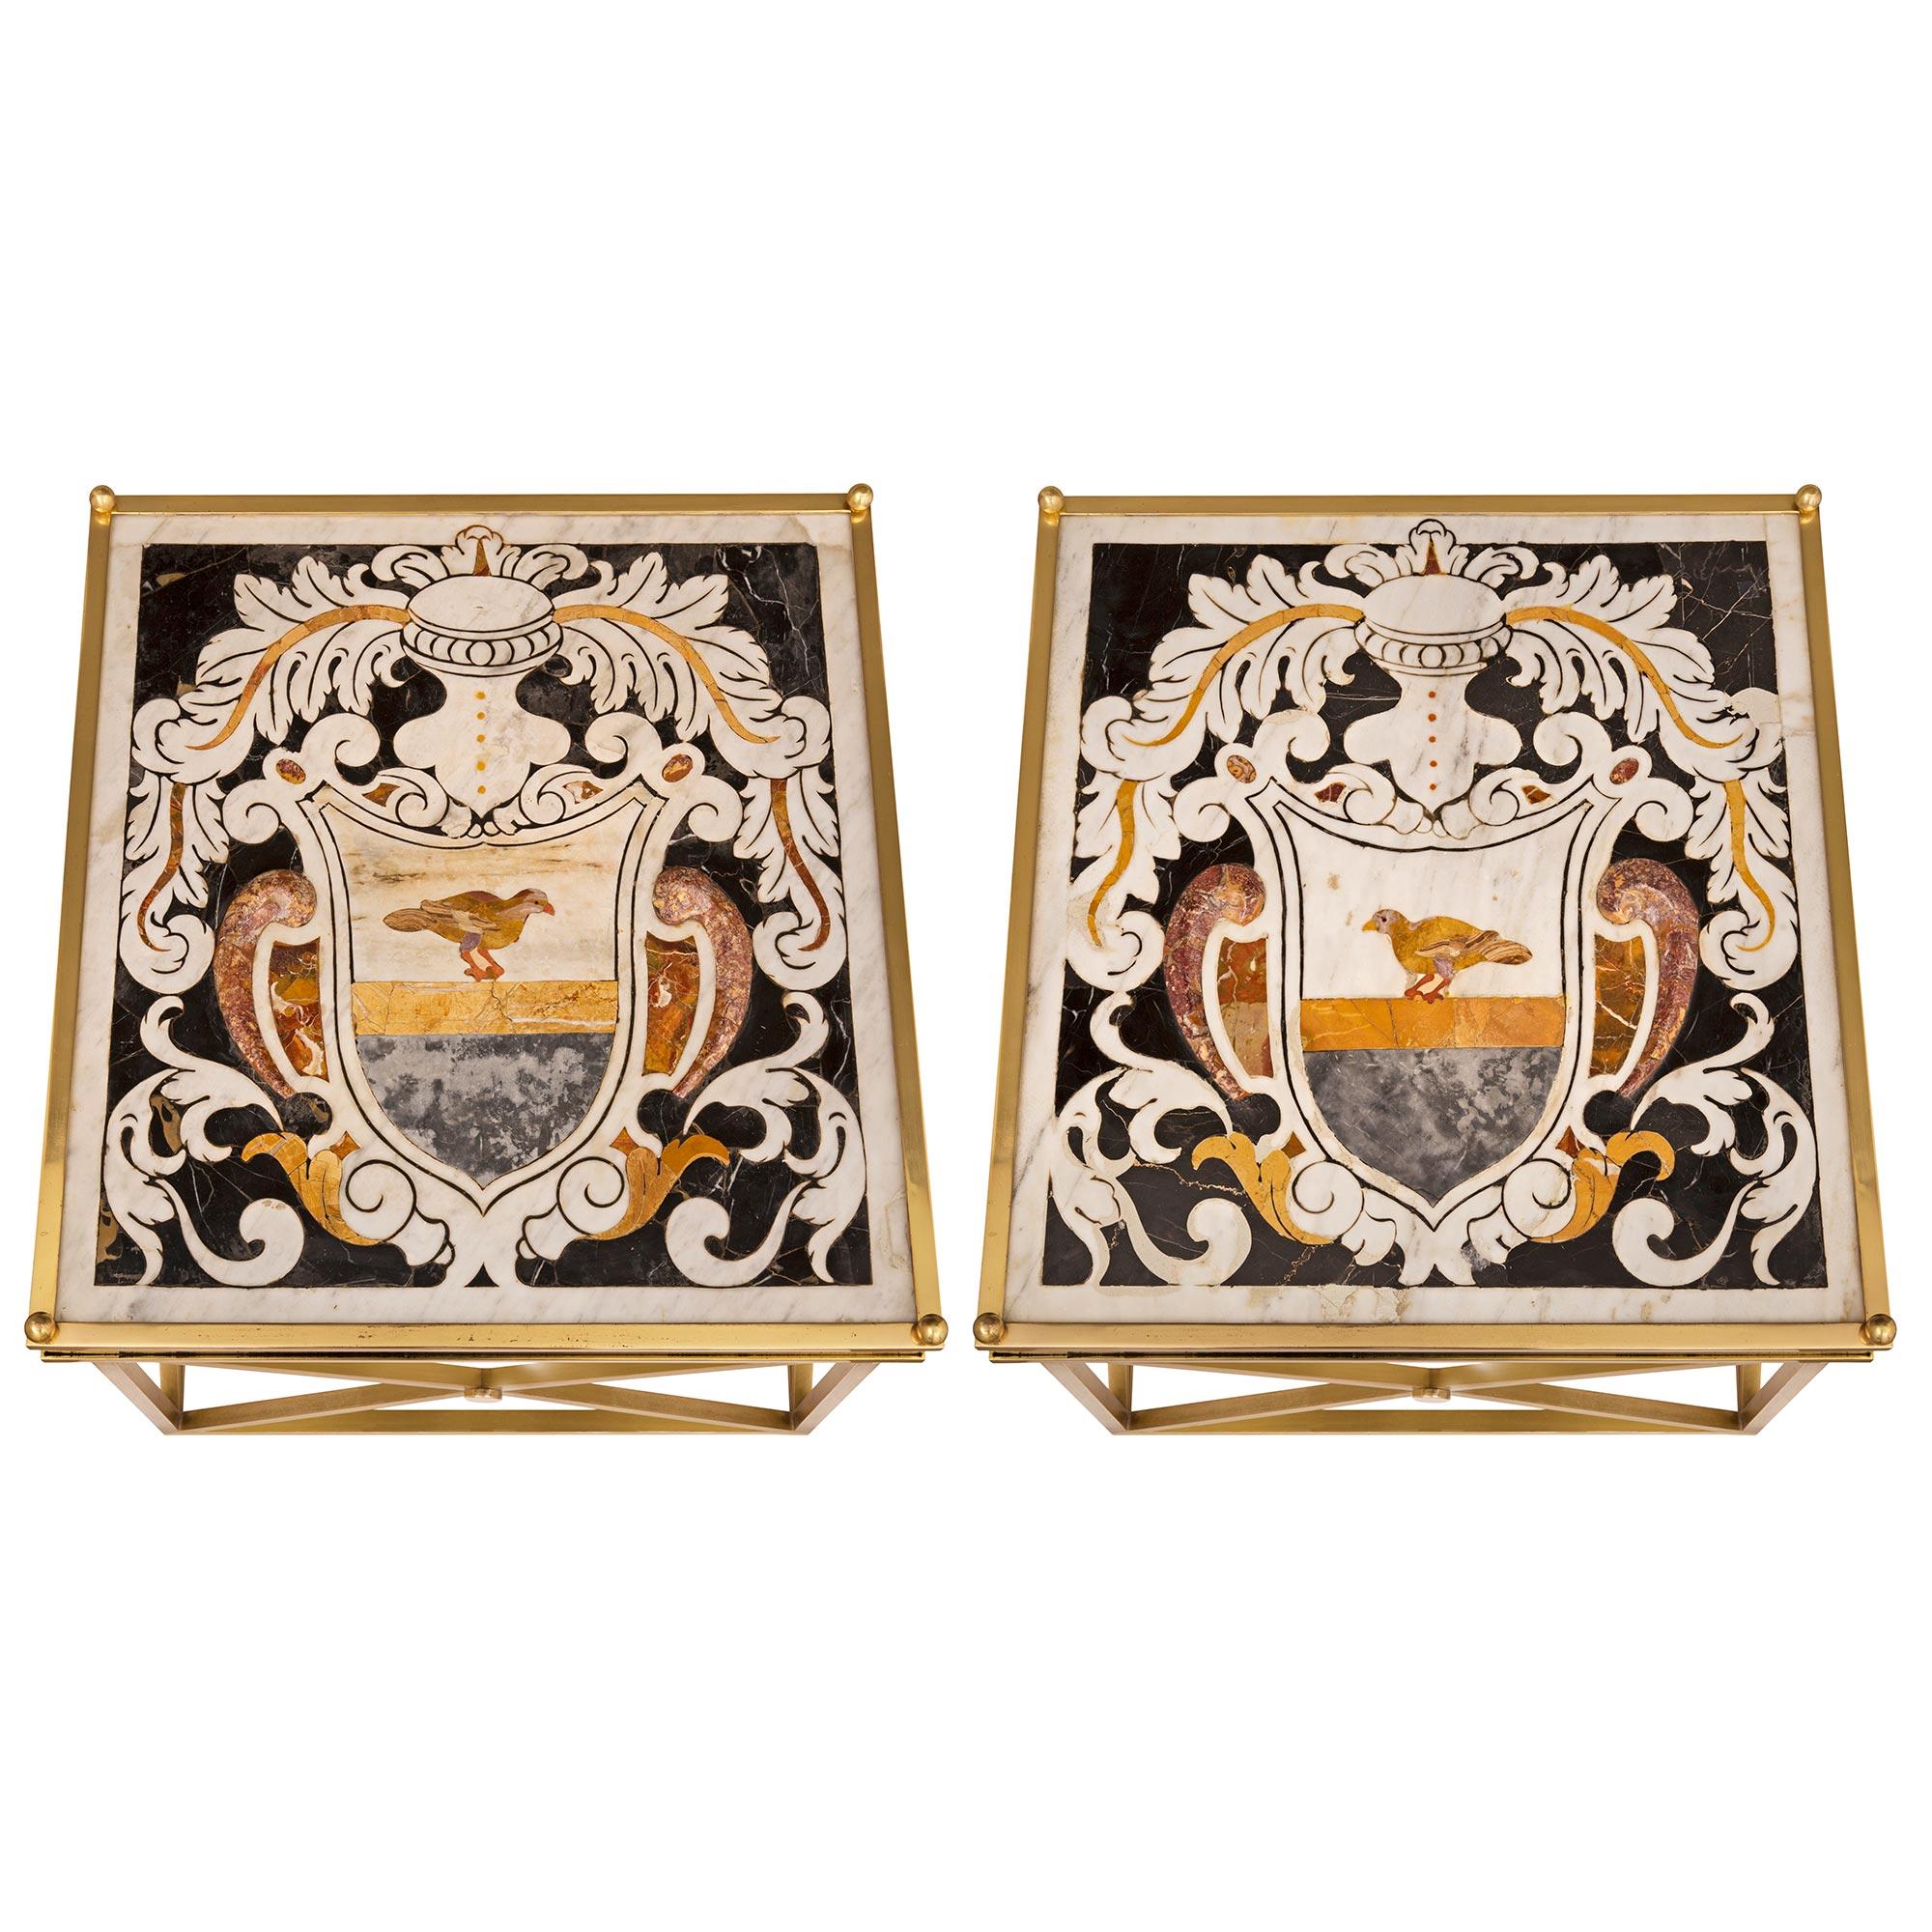 A sensational and extremely decorative true pair of Italian 19th century Pietra Dura marble plateaux set within beautiful 20th century brass bases mounted as side tables. Each table is raised by fine ball feet below the most elegant brass base with